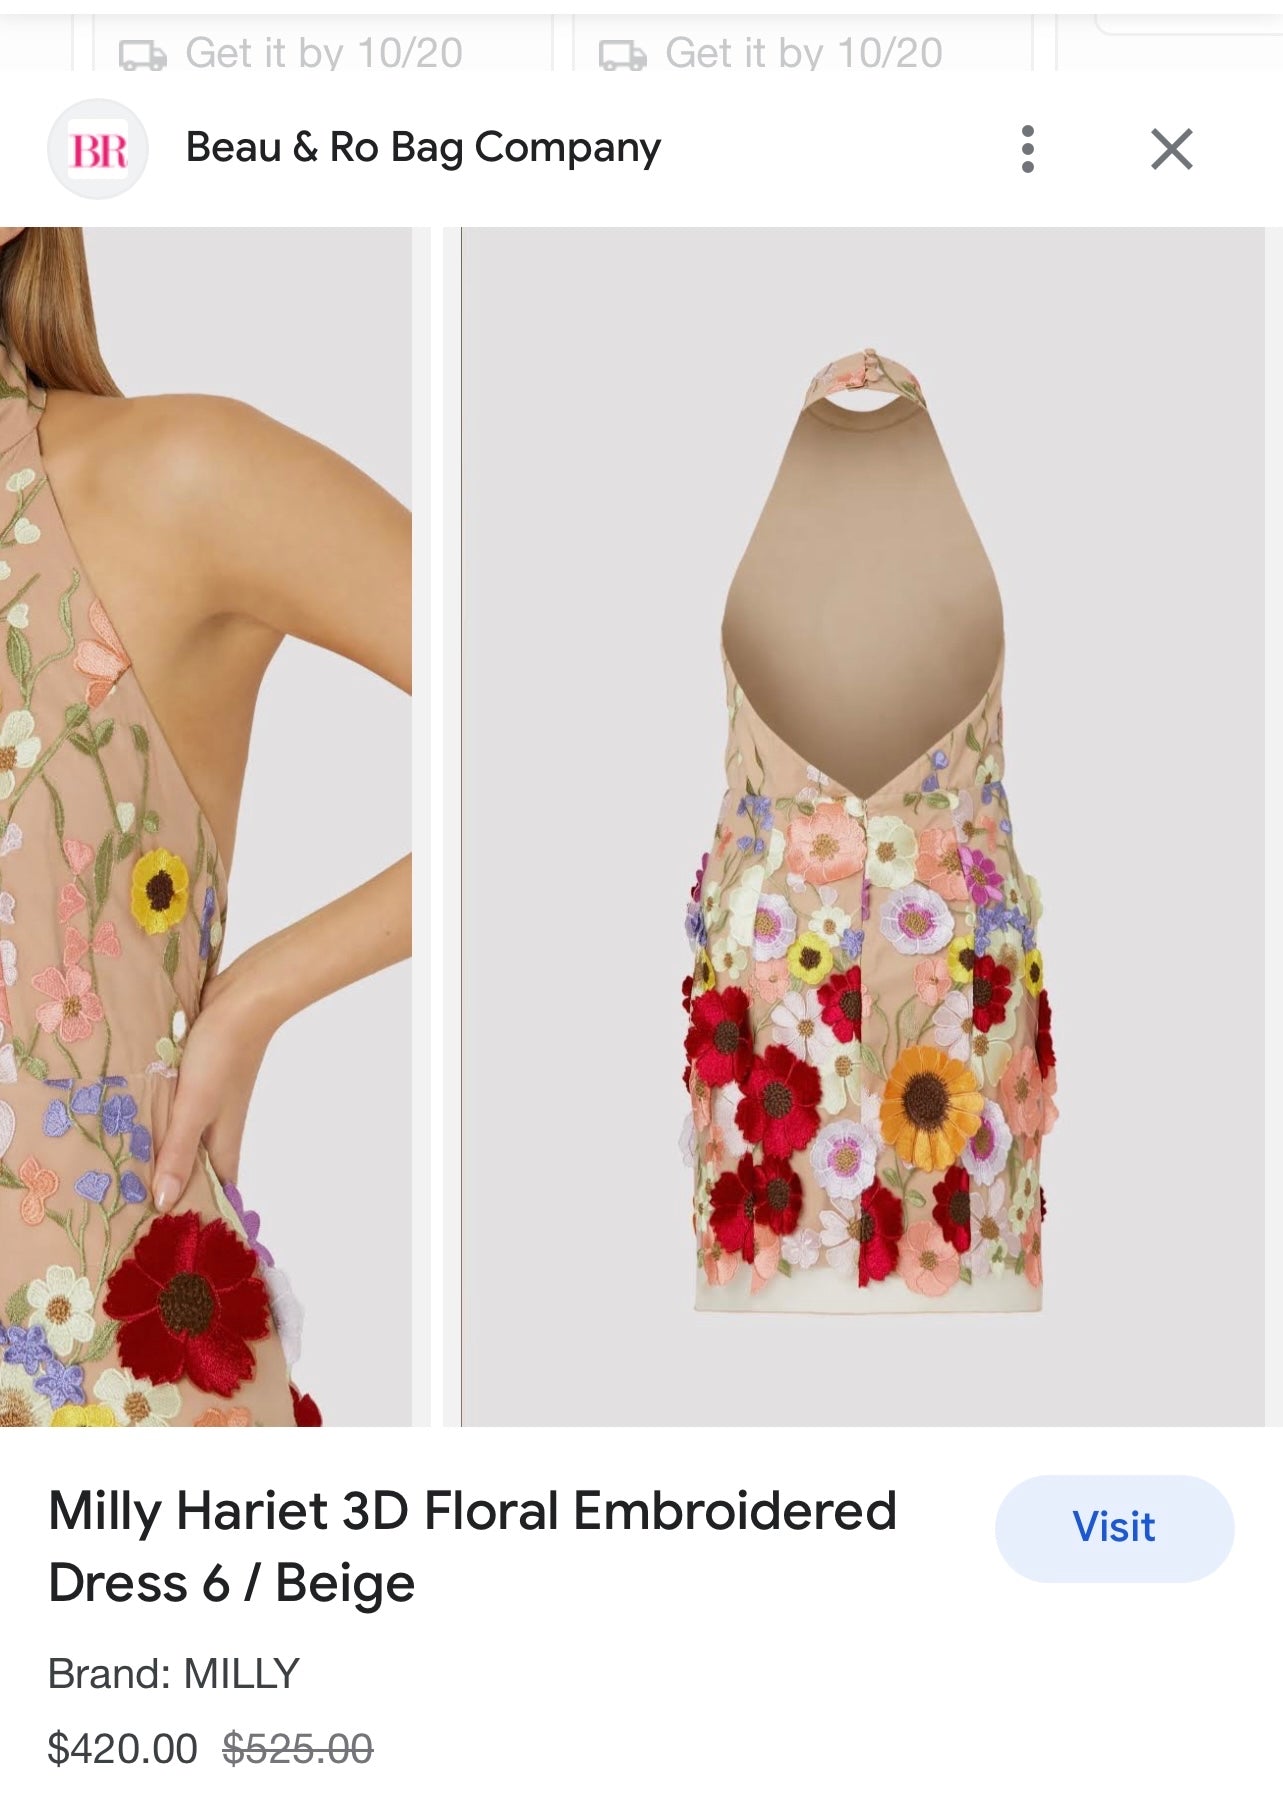 Mesh Backless Mini Dress with Halter Neckline covered in 3D Colorful Embroidered Flower Appliqués (Medium)